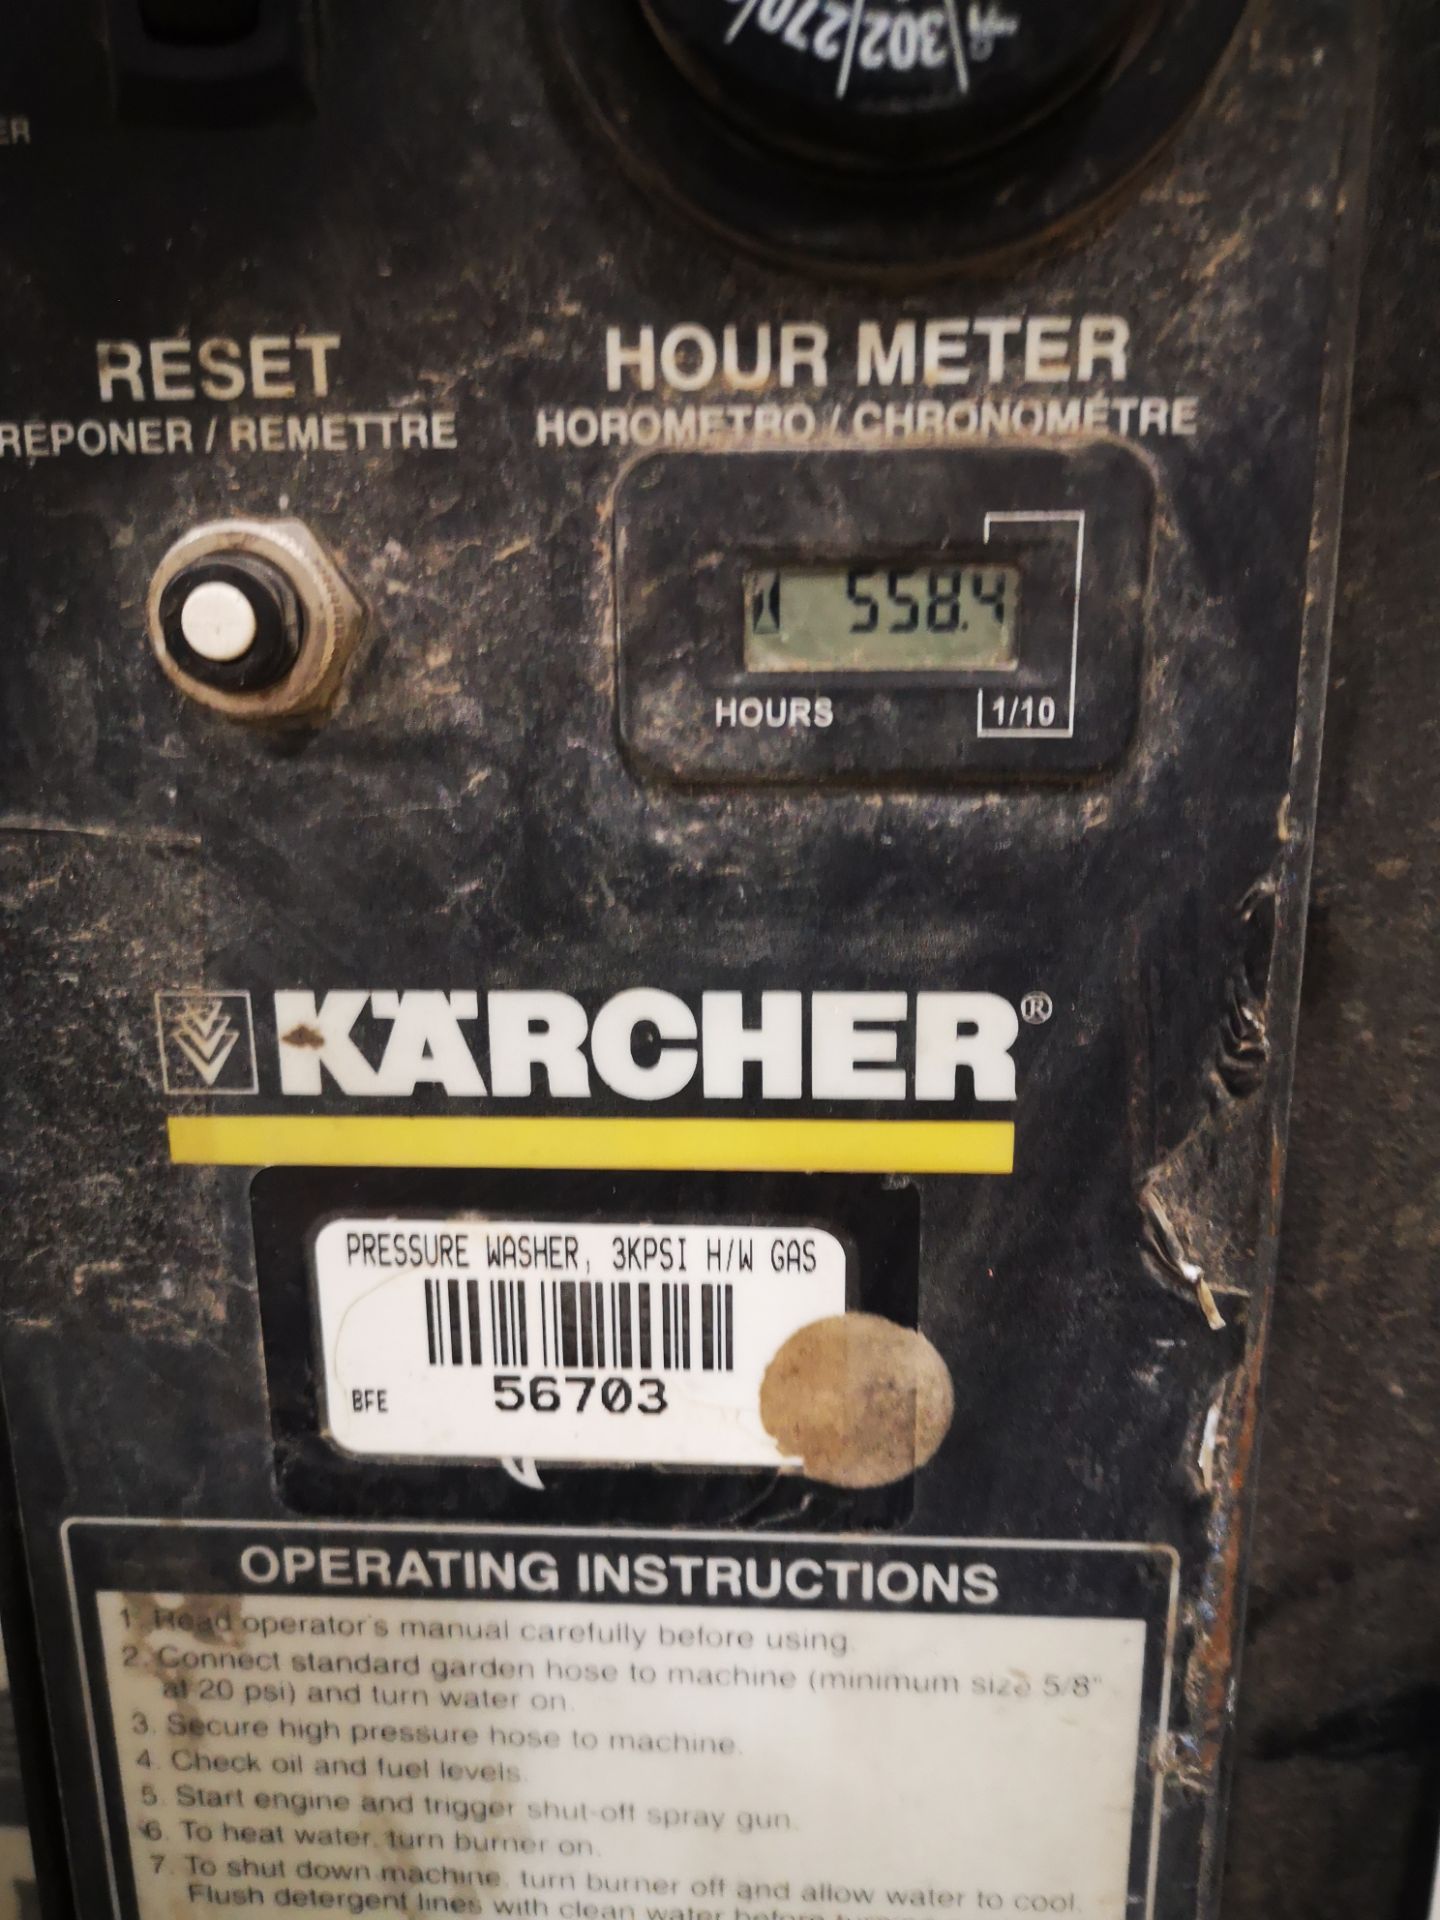 KARCHER, GAS POWERED, HOT WATER PRESSURE WASHER, 558 HOURS - Image 9 of 9